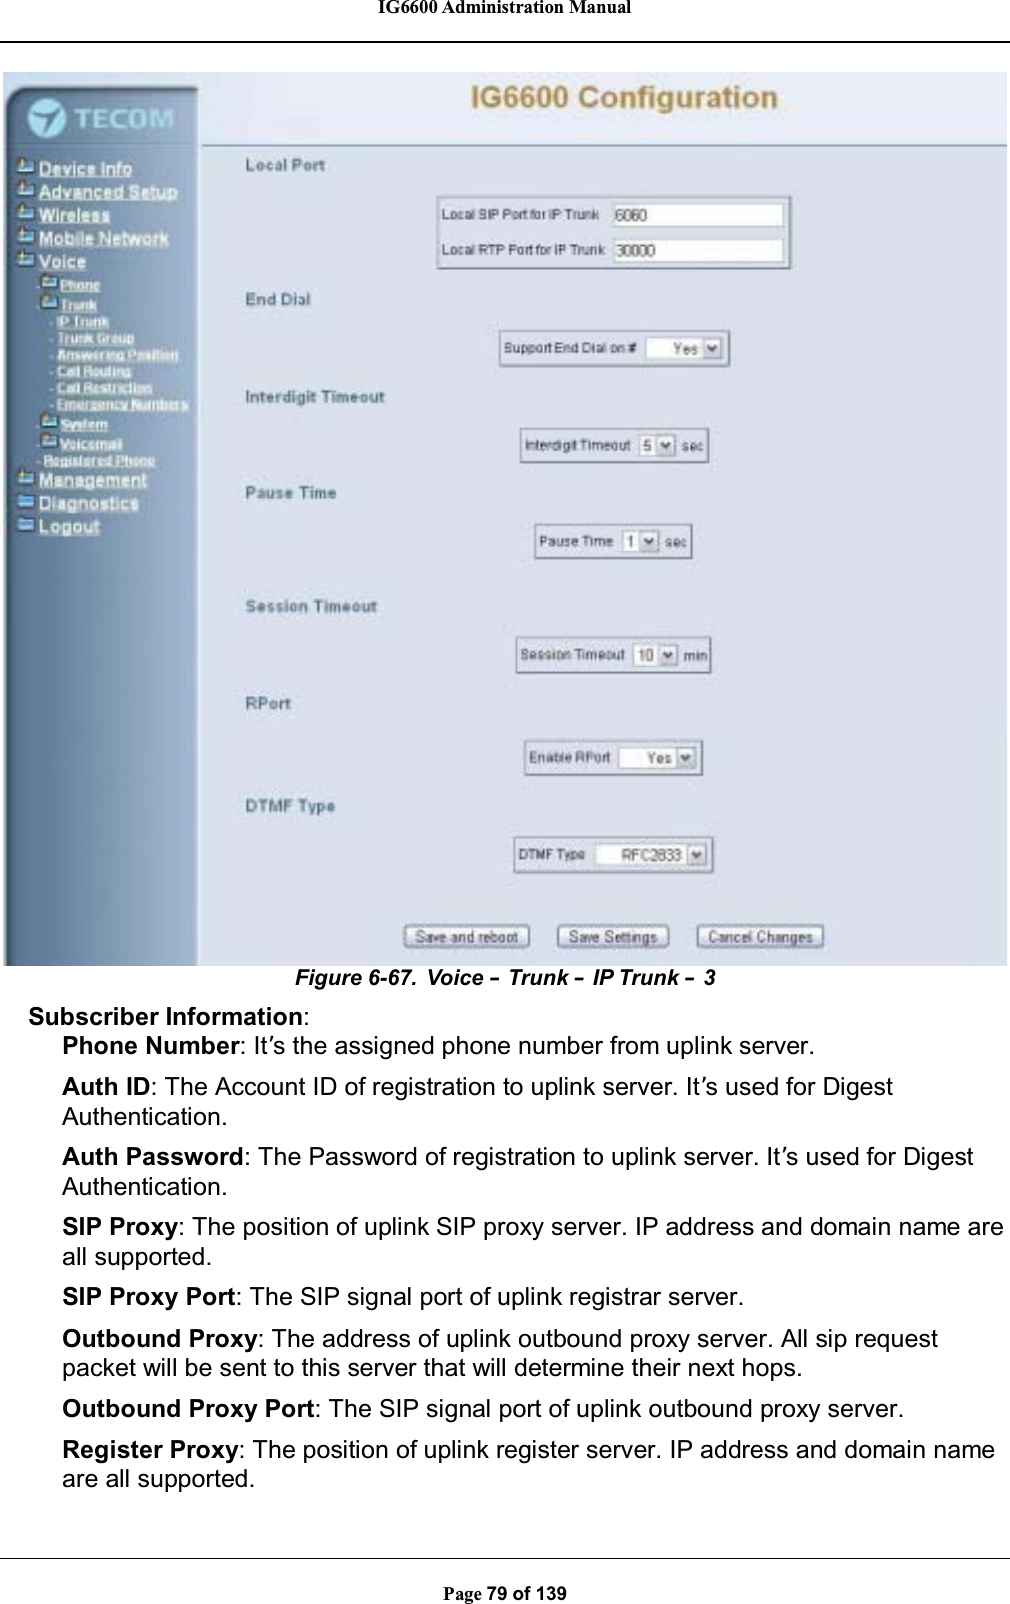 IG6600 Administration ManualPage 79 of 139Figure 6-67. Voice –Trunk –IP Trunk –3Subscriber Information:Phone Number: It’s the assigned phone number from uplink server.Auth ID: The Account ID of registration to uplink server. It’s used for DigestAuthentication.Auth Password: The Password of registration to uplink server. It’s used for DigestAuthentication.SIP Proxy: The position of uplink SIP proxy server. IP address and domain name areall supported.SIP Proxy Port: The SIP signal port of uplink registrar server.Outbound Proxy: The address of uplink outbound proxy server. All sip requestpacket will be sent to this server that will determine their next hops.Outbound Proxy Port: The SIP signal port of uplink outbound proxy server.Register Proxy: The position of uplink register server. IP address and domain nameare all supported.